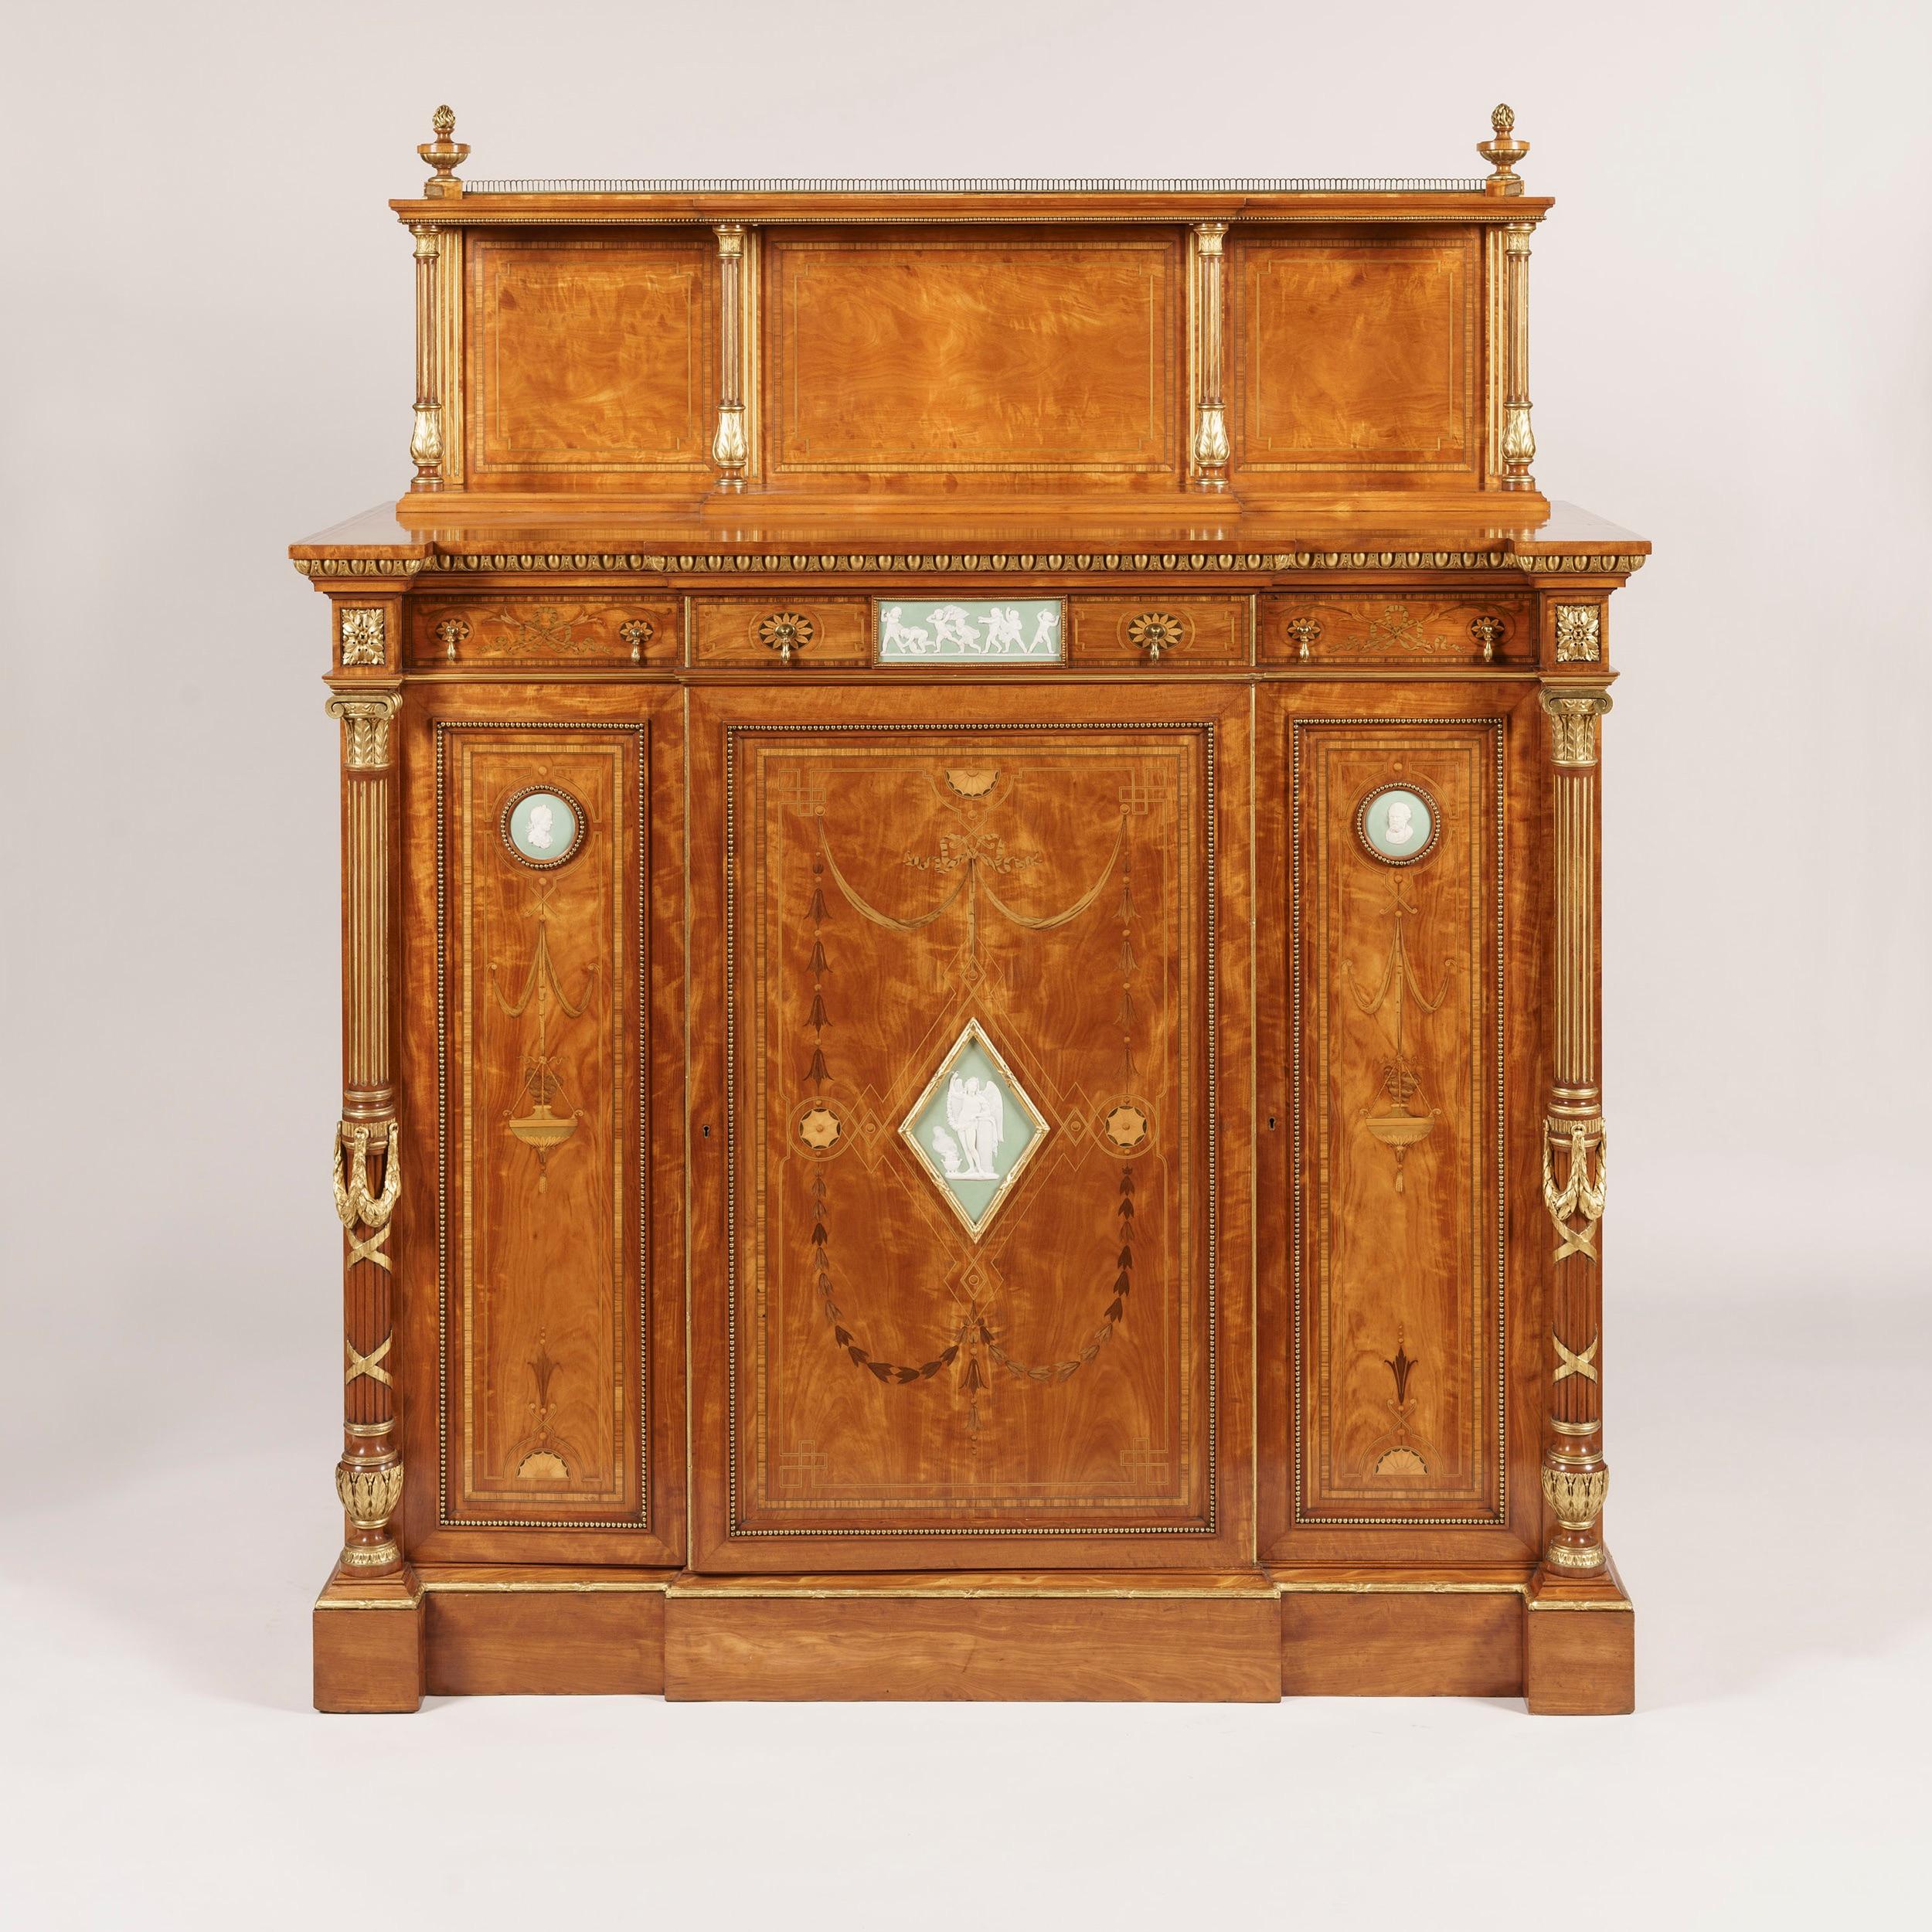 A fine side cabinet
firmly attributed to Wright and Mansfield.

Constructed in a brilliant satinwood, and skillfully incorporating tulipwood, harewood and various specimen wood marquetry work, and expertly carved giltwood accents; of gentle